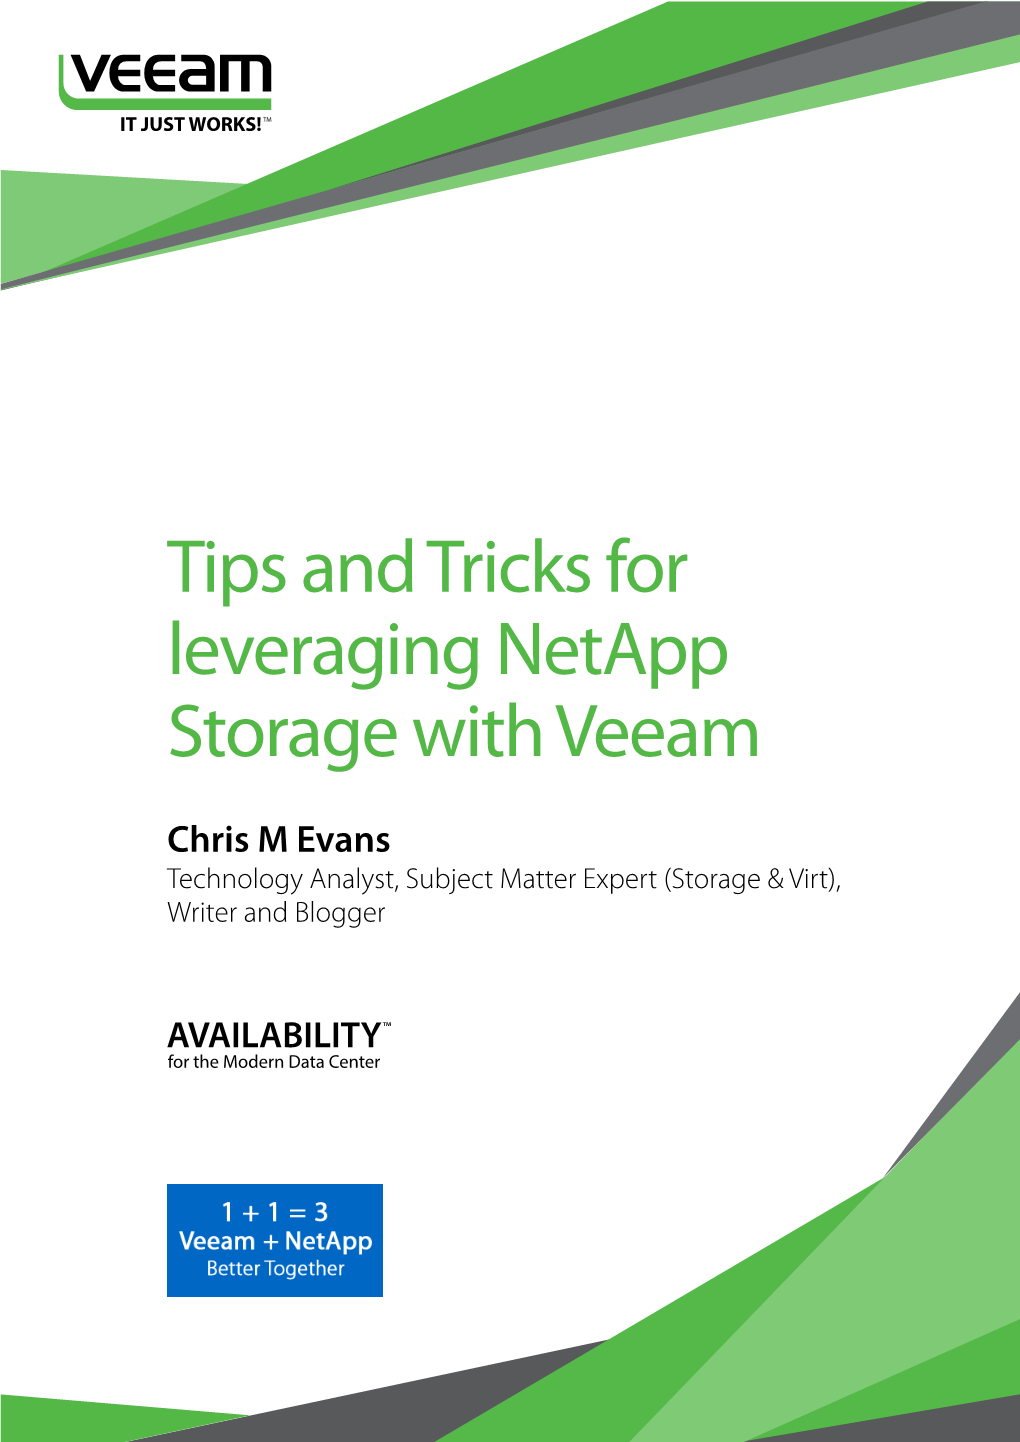 Tips and Tricks for Leveraging Netapp Storage with Veeam